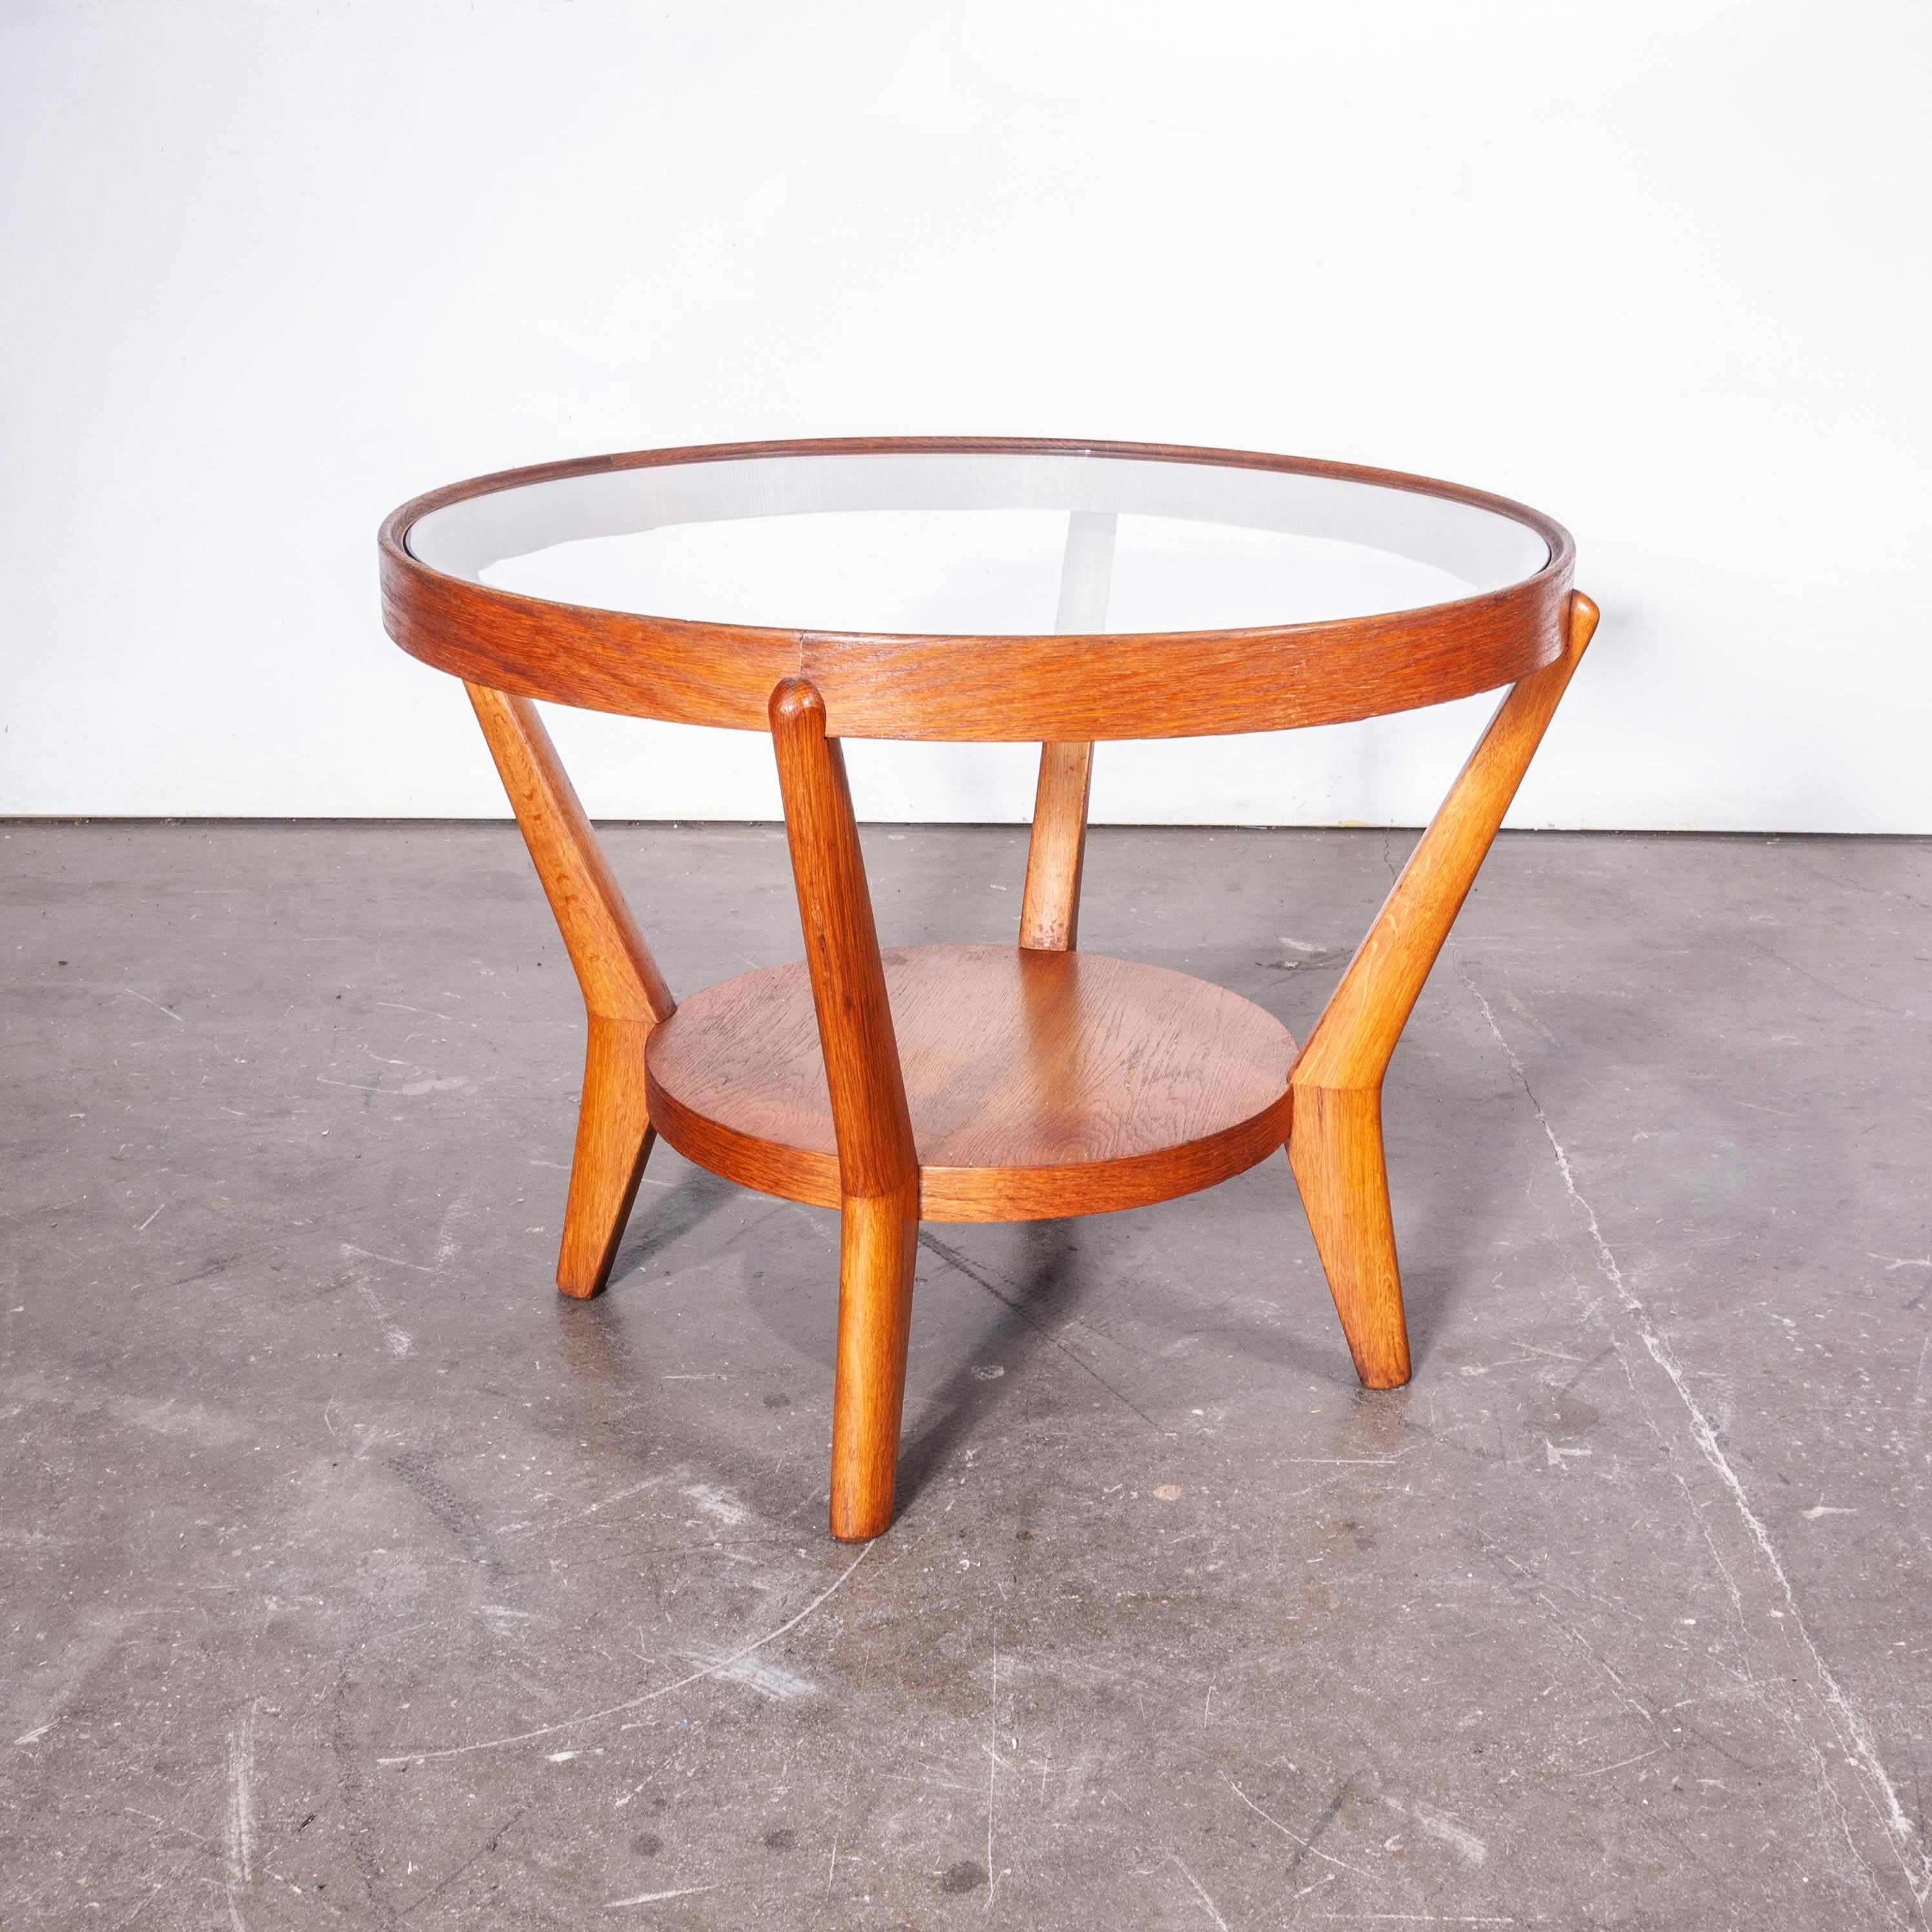 Czech 1950s Round Occasional Table by Kozelka and Kropacek for Interieur Praha, Ligh